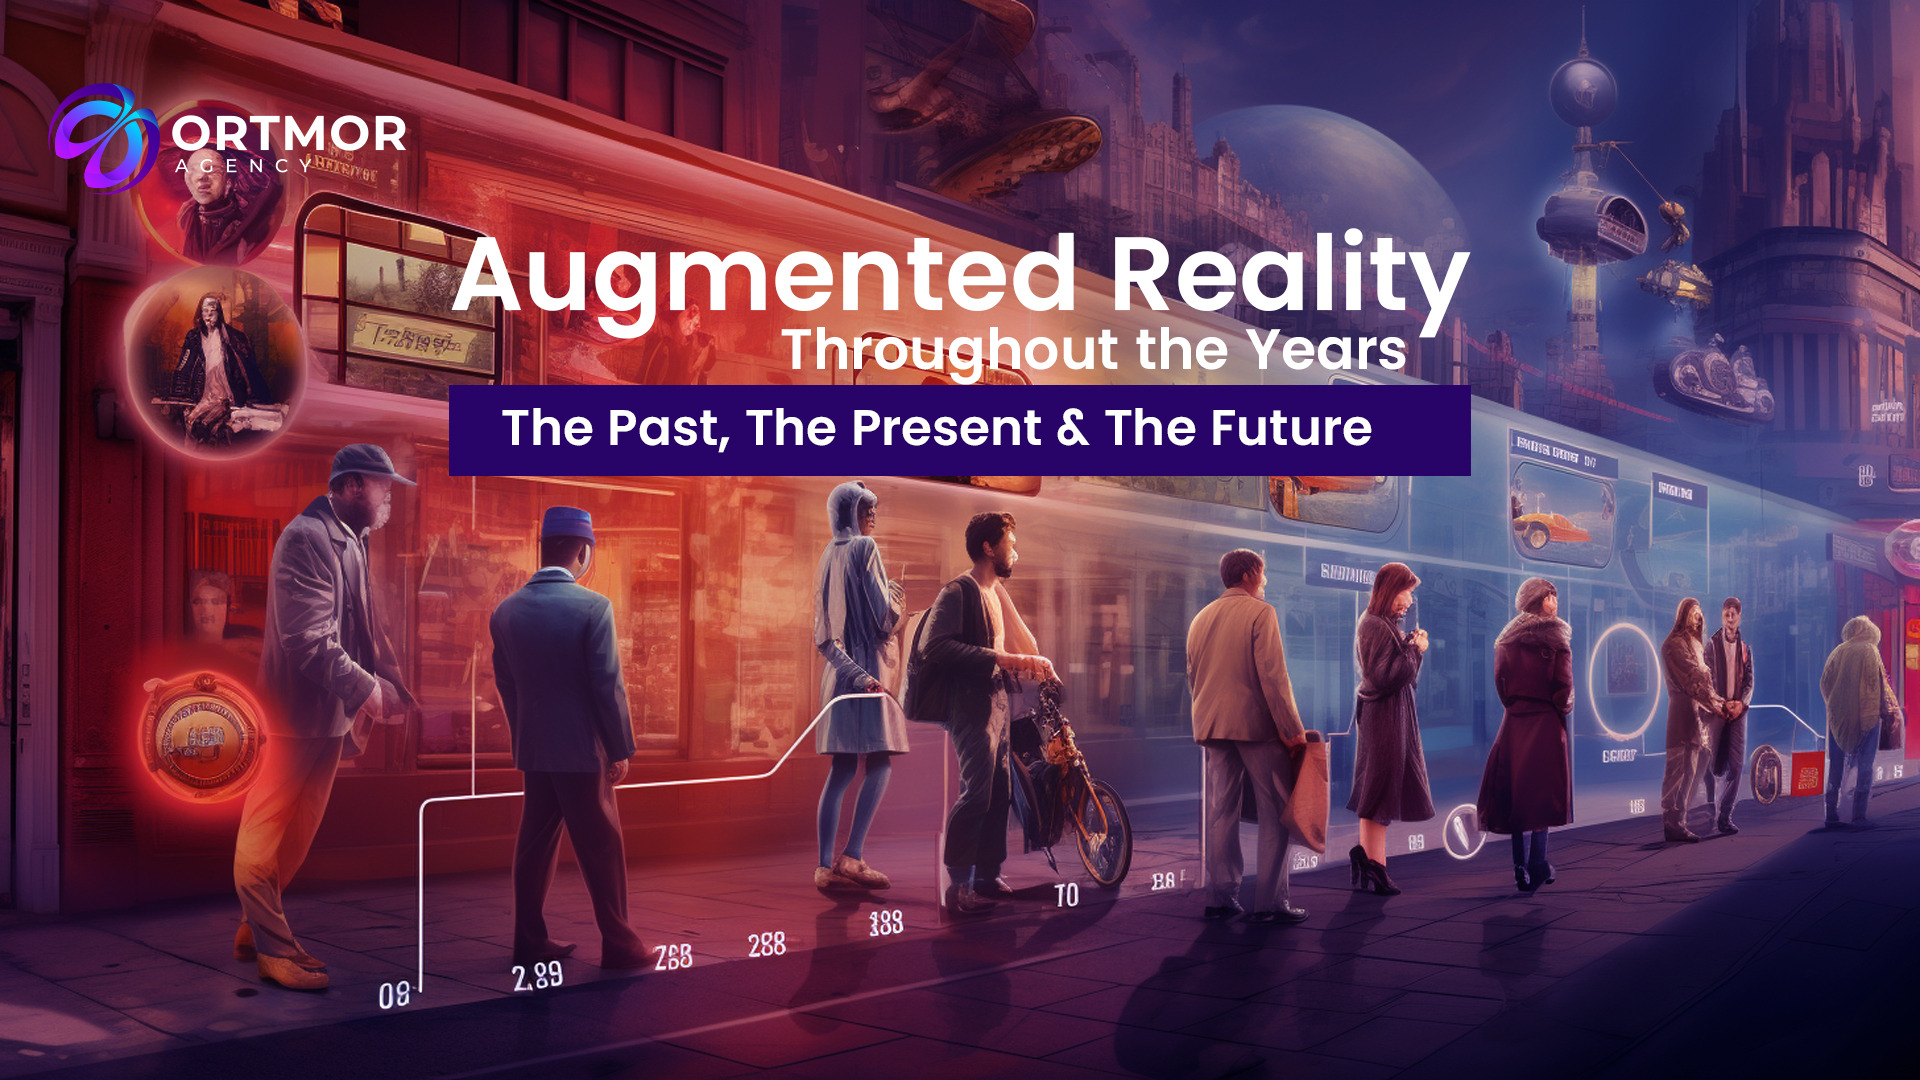 The Evolution of Augmented Reality: A Brief History